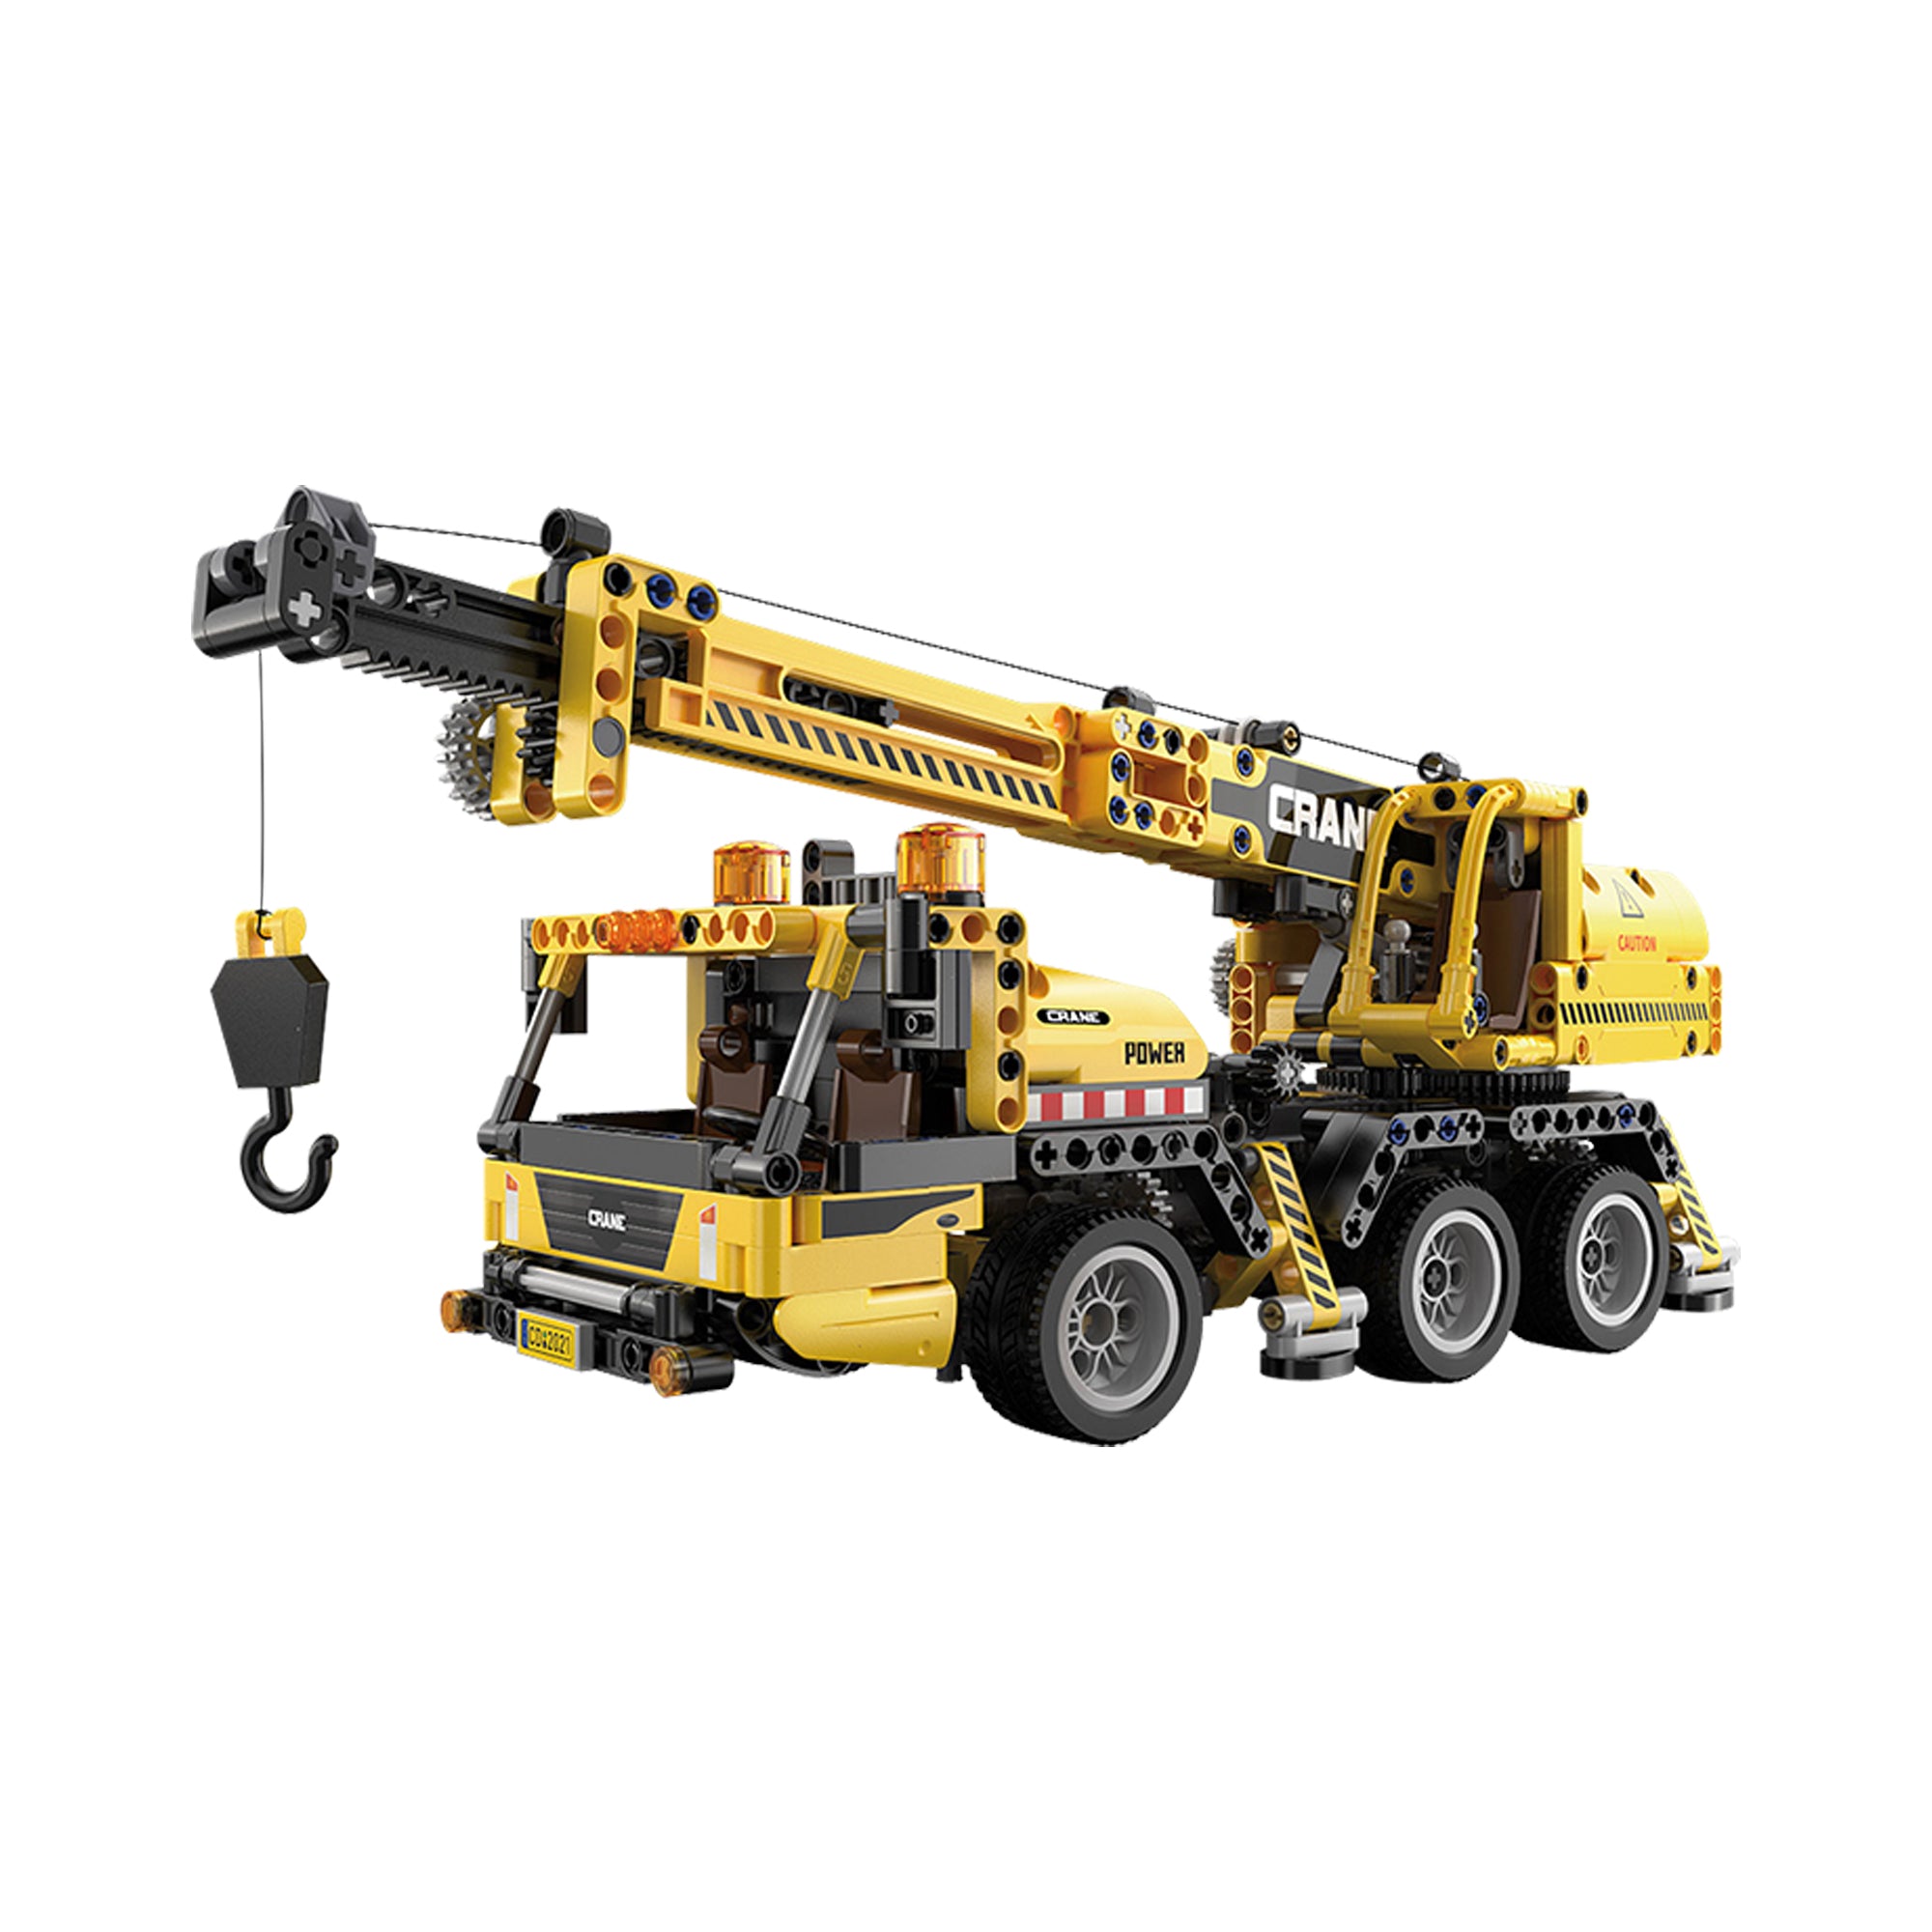 Crane Truck Toy for Kid C65005W - Construction